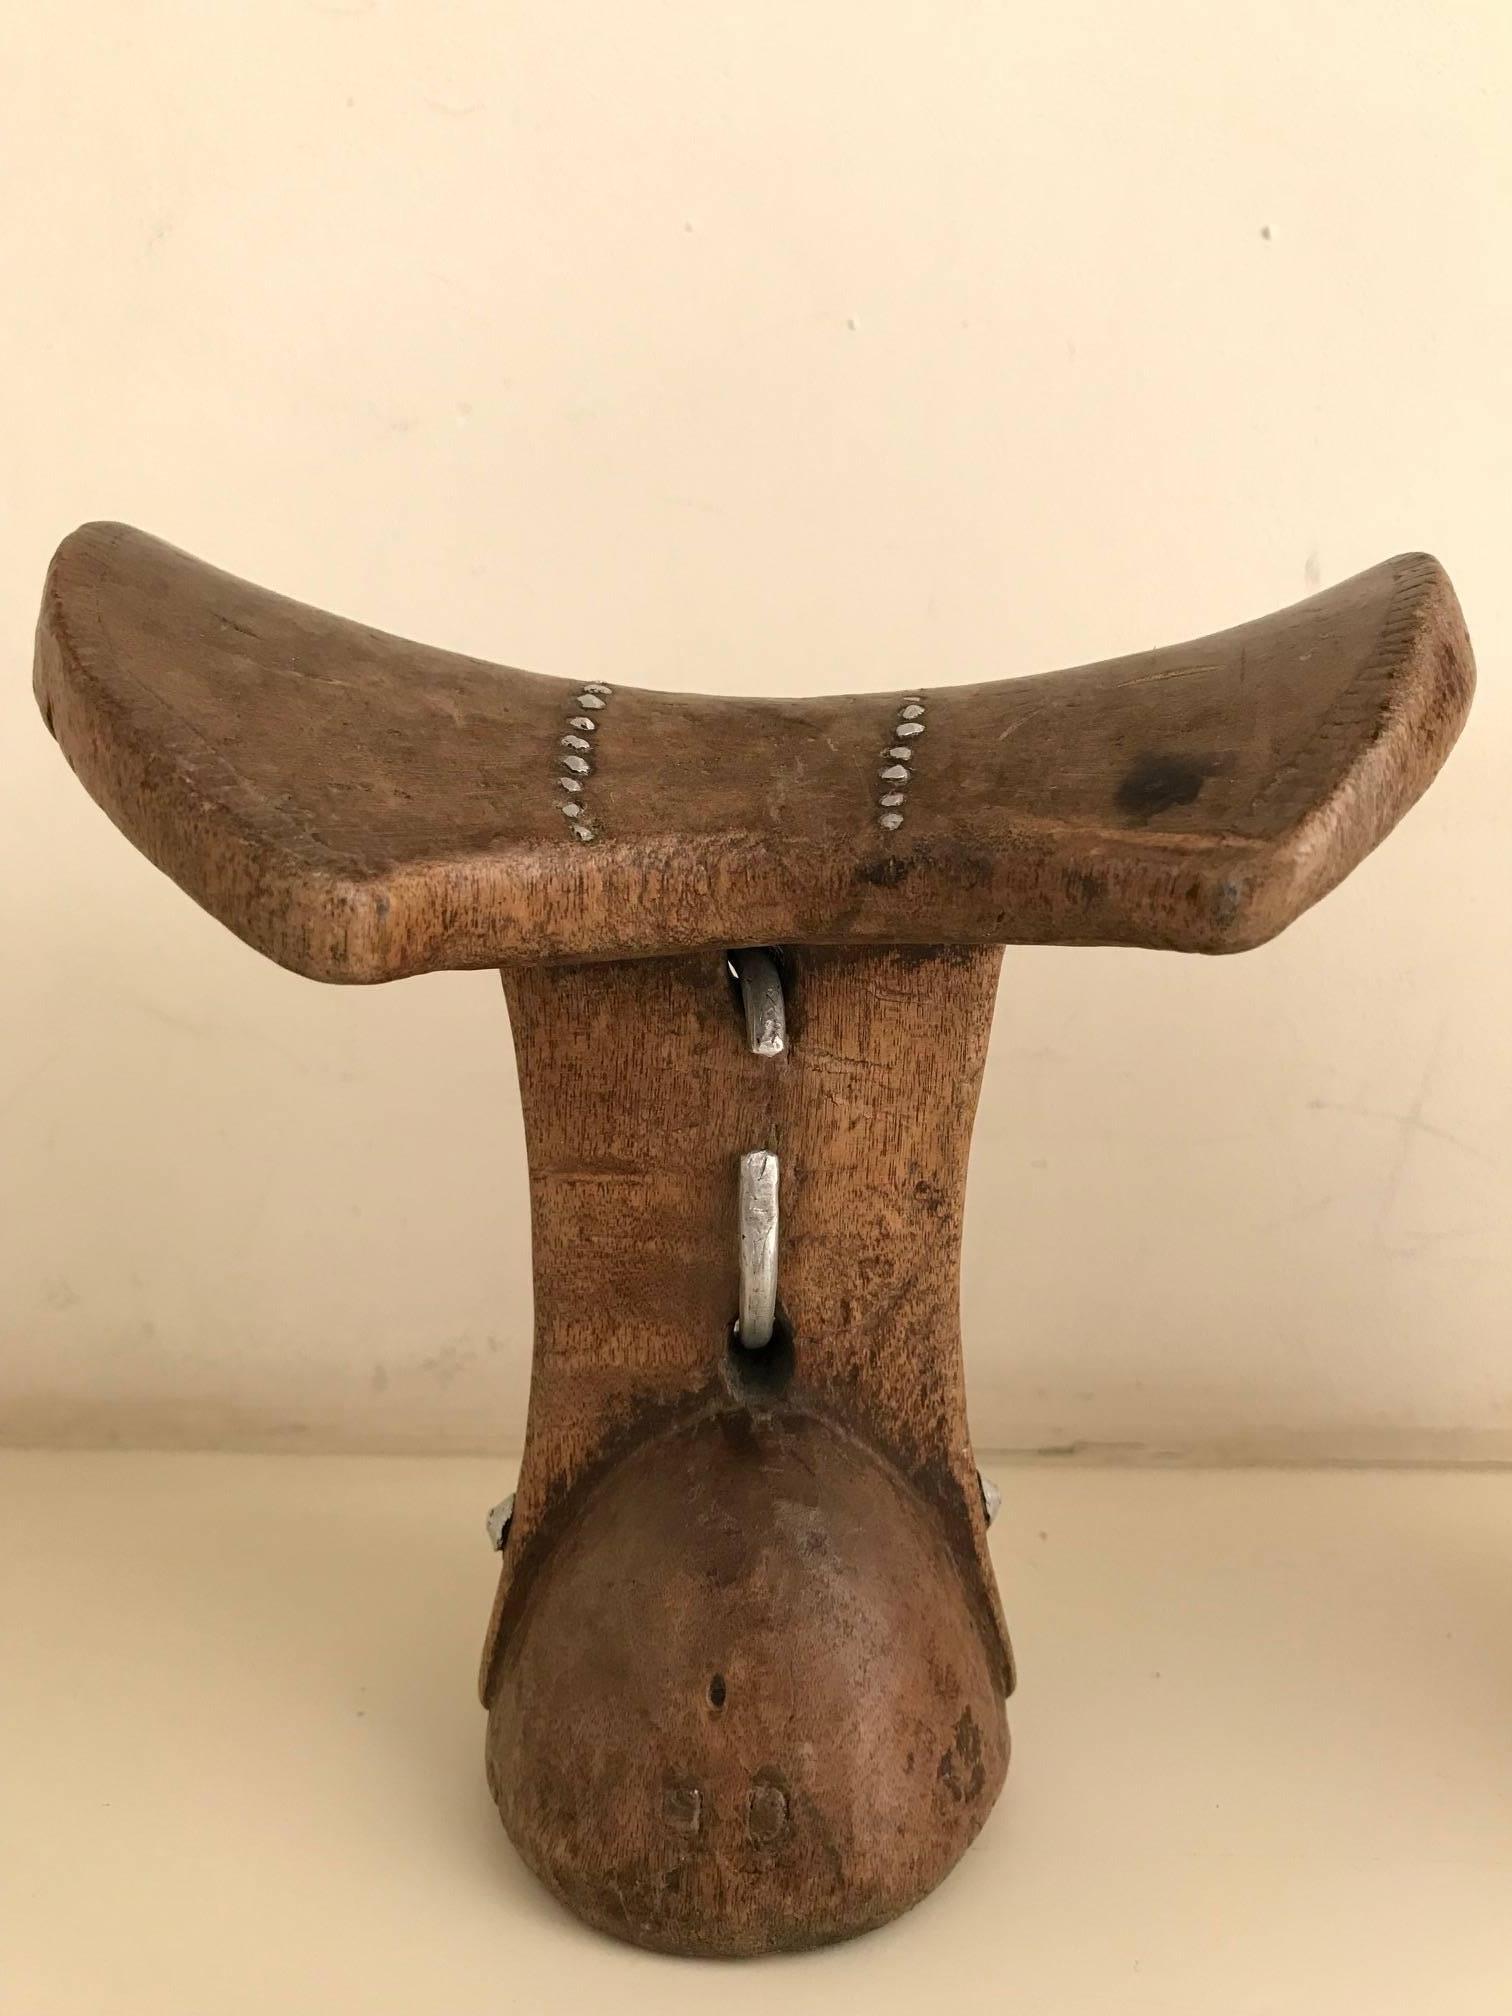 A set of two Ethiopian Turkana headrests made by the Dassanetch people. Selling as a set but can be separated, just work very well together as decorative objects.